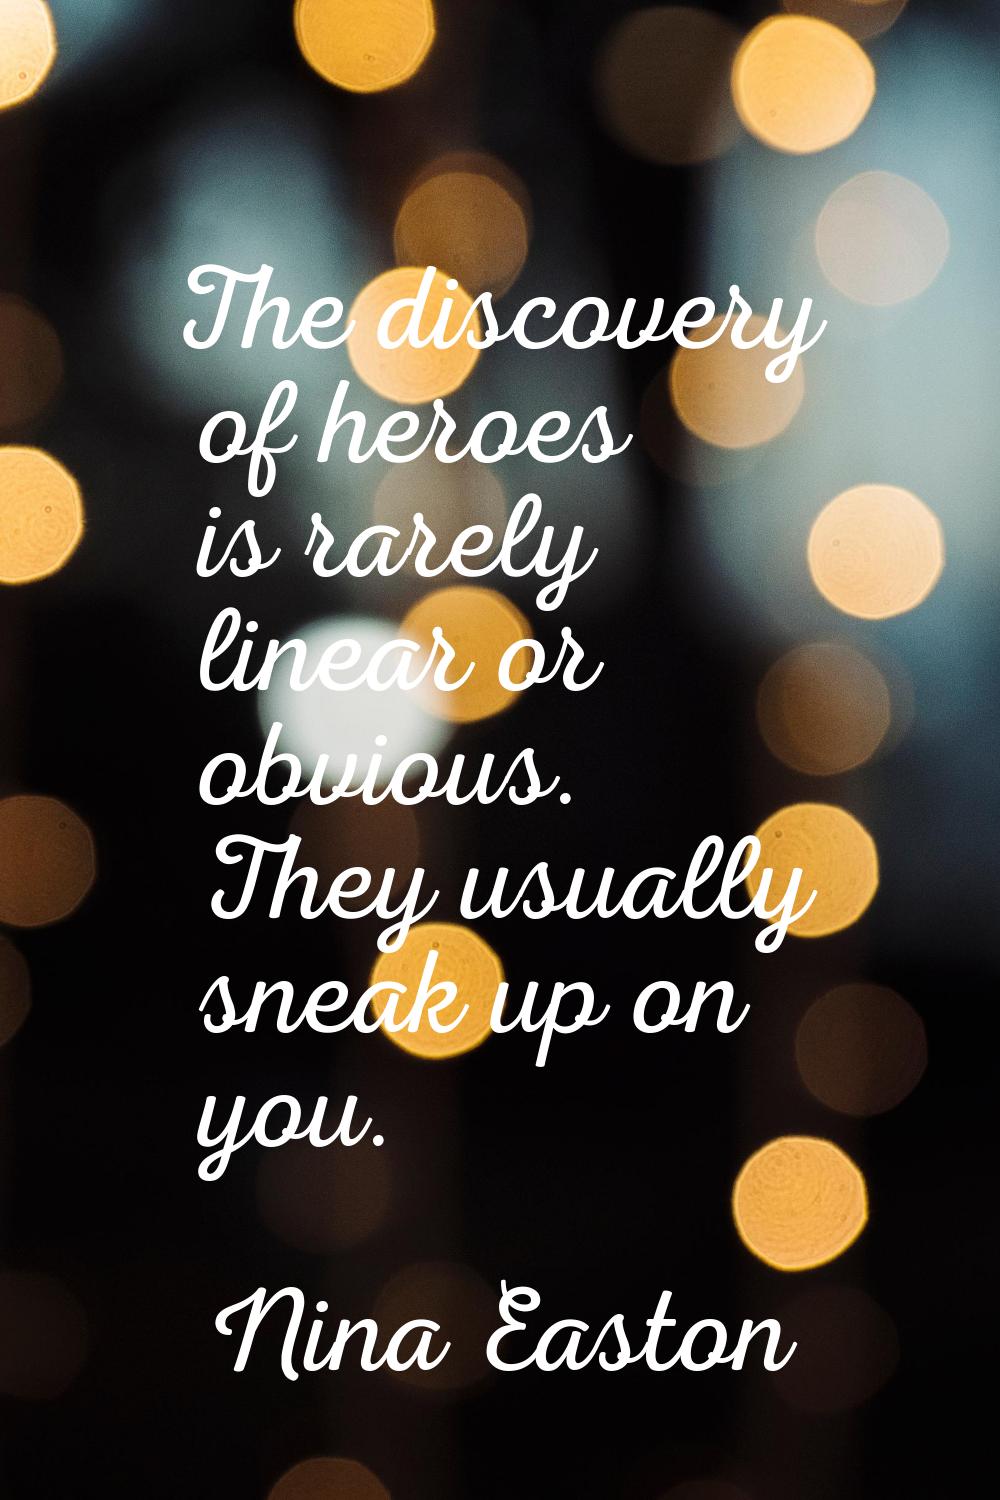 The discovery of heroes is rarely linear or obvious. They usually sneak up on you.